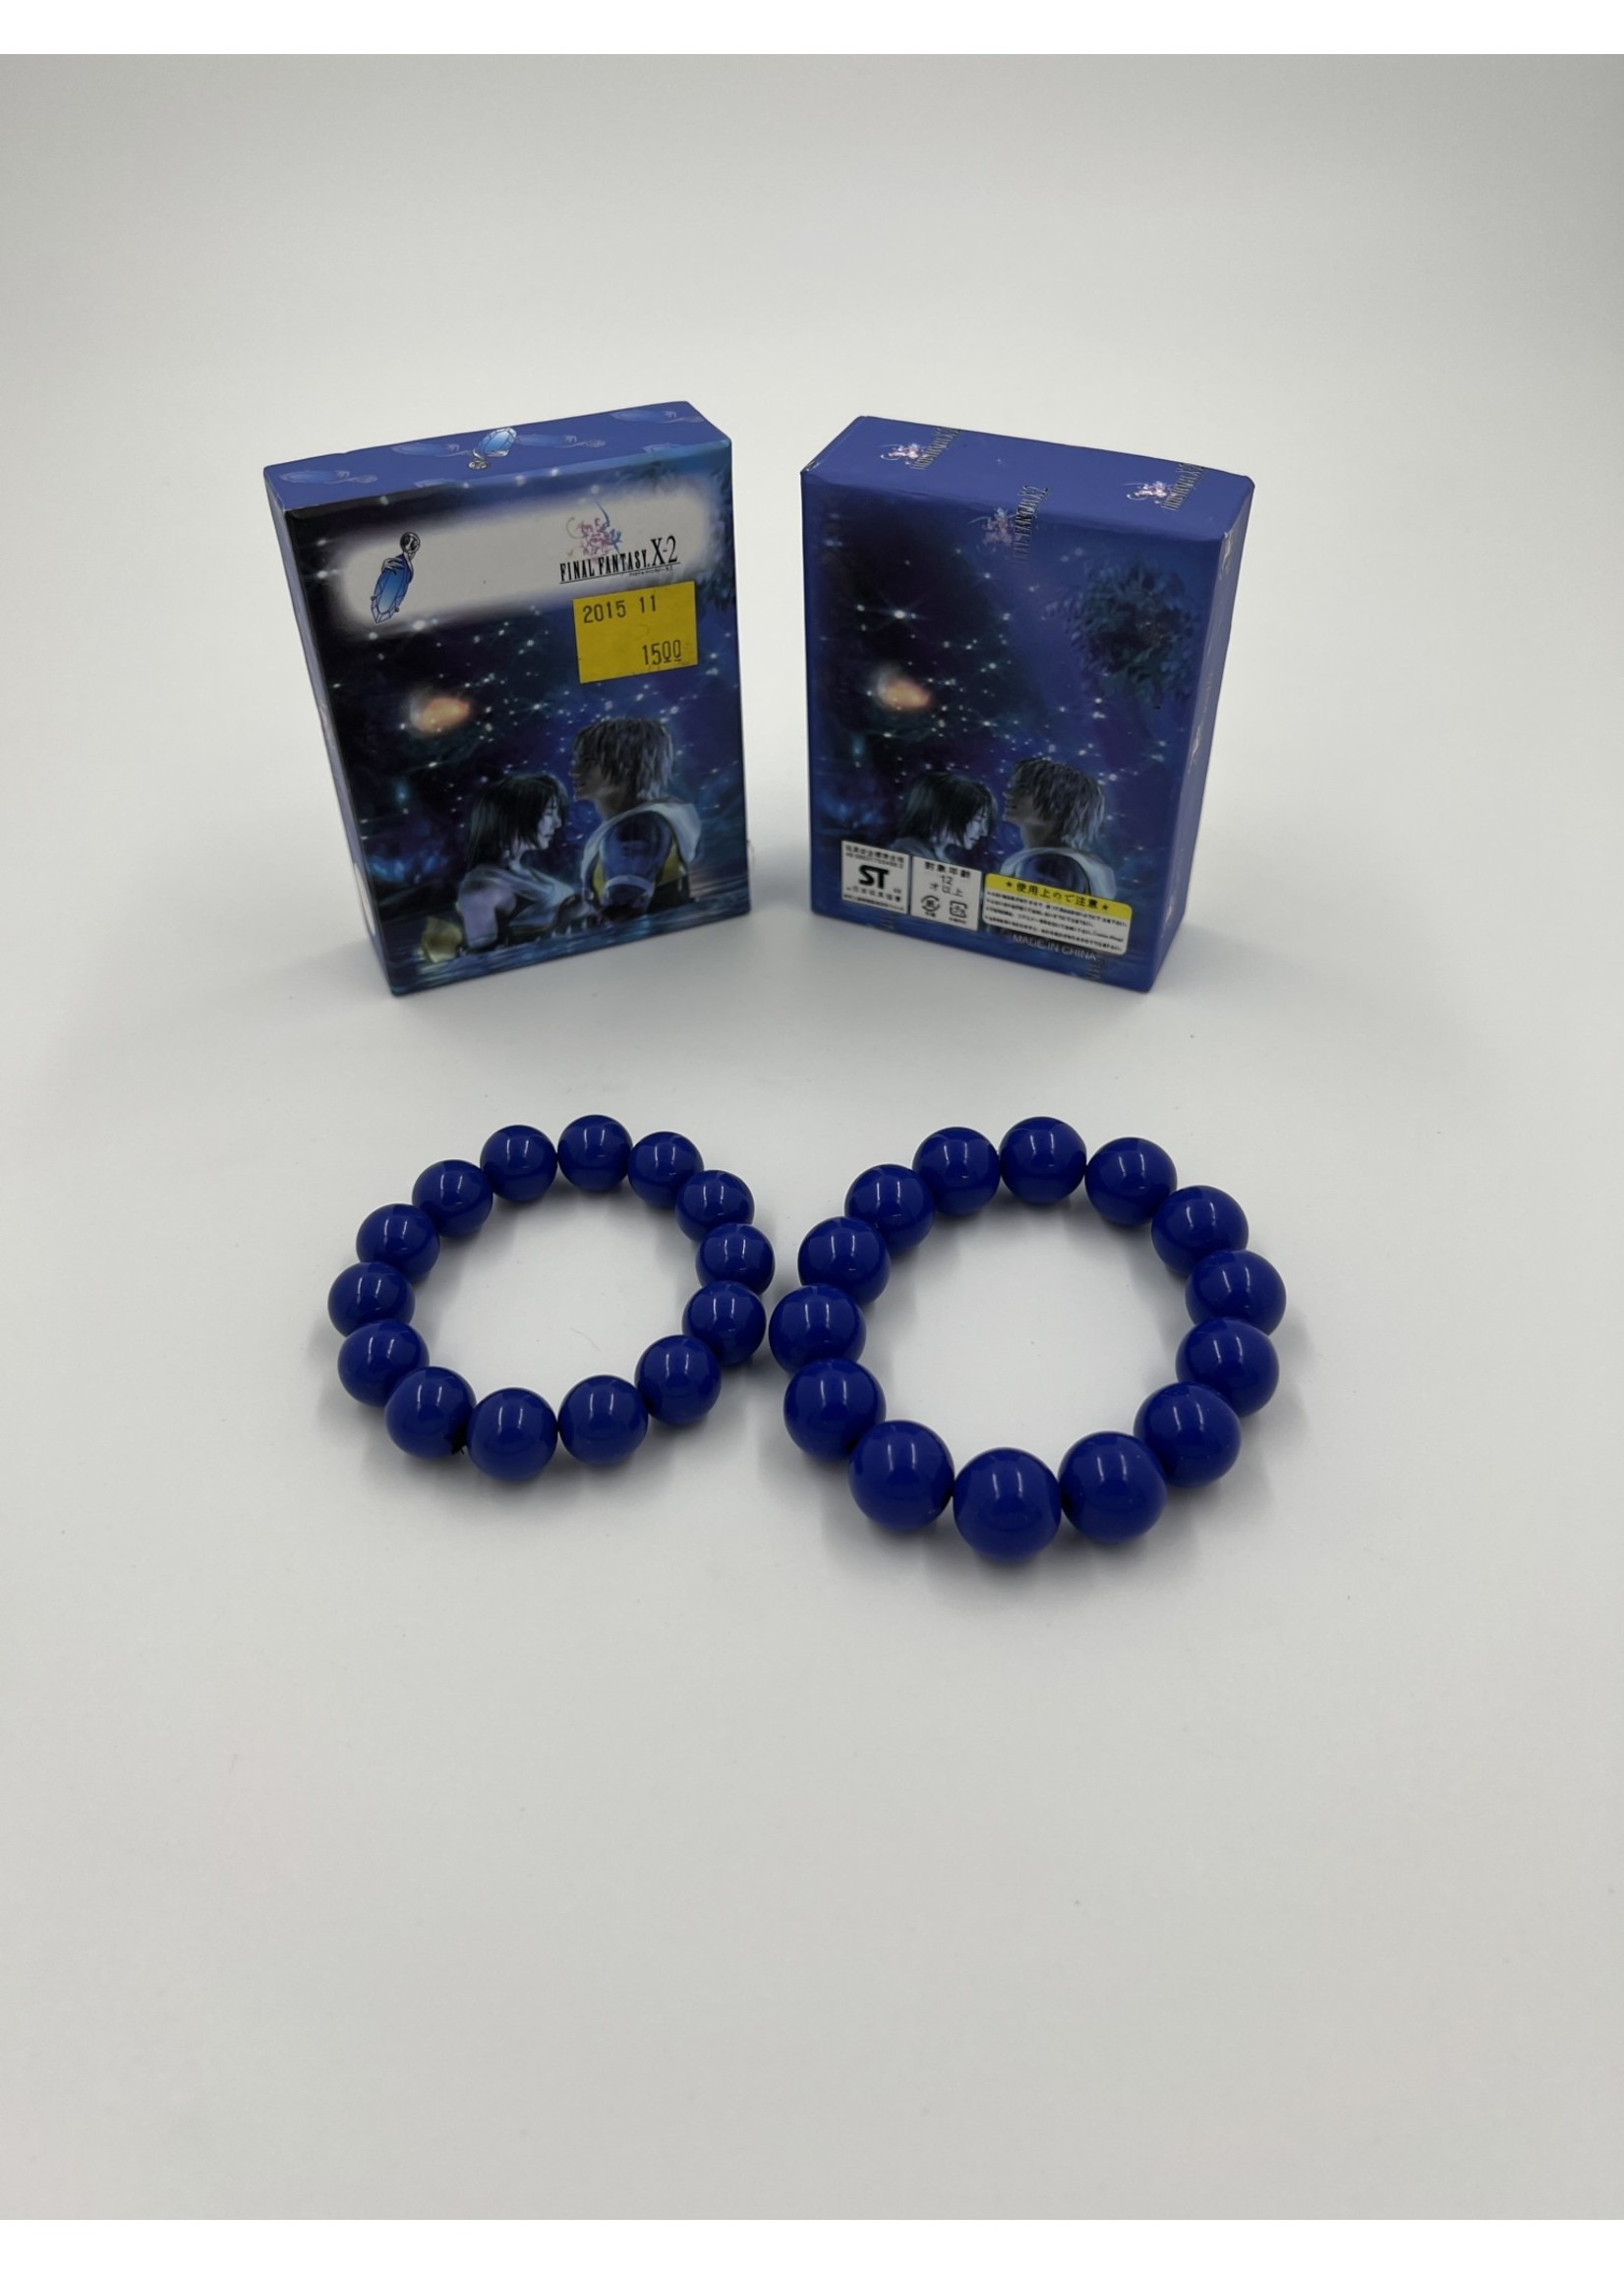 Other Things Final Fantasy X-2 Blue Bead Bracelet